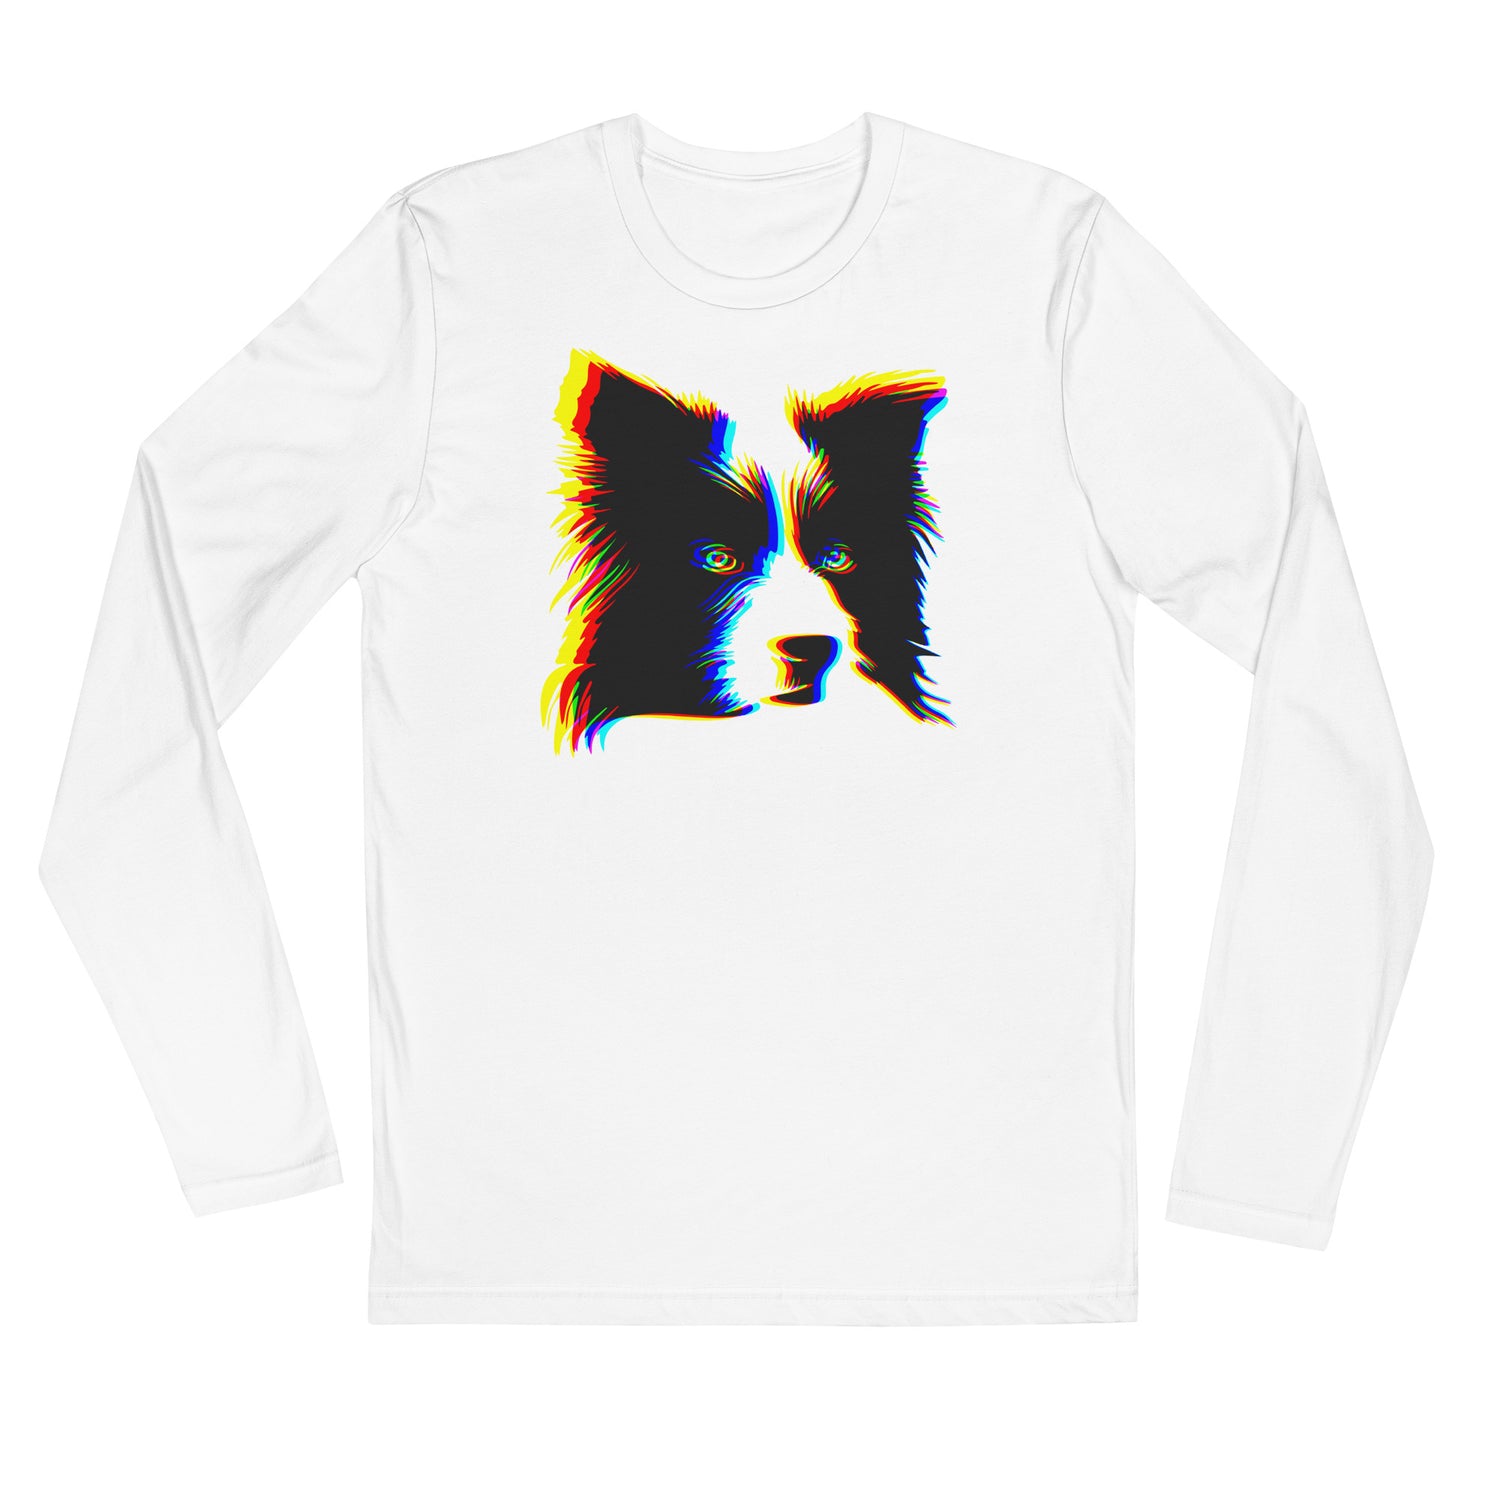 Anaglyph Border Collie face on unisex white long sleeve t-shirt